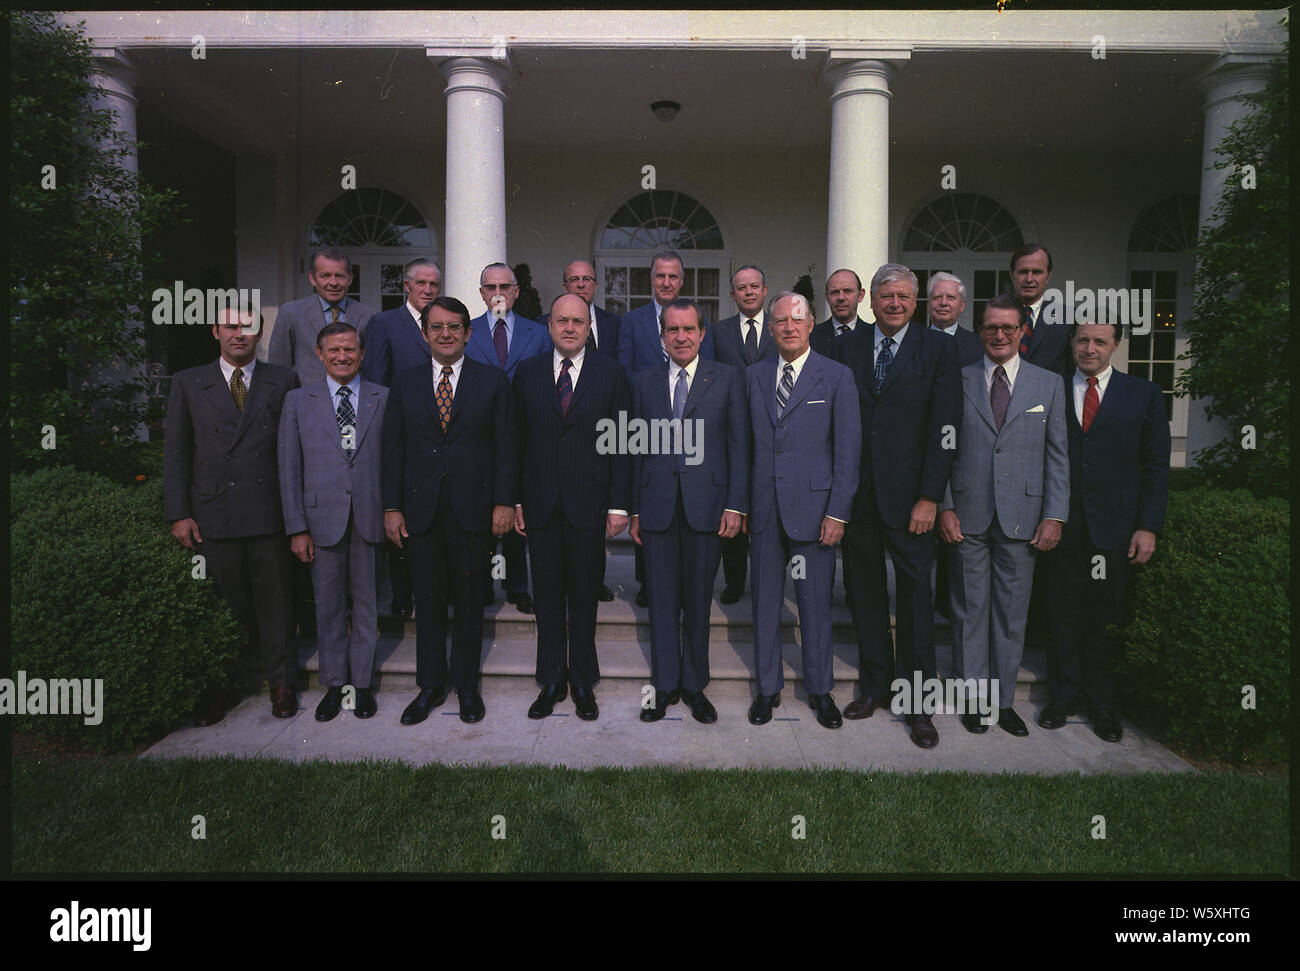 Richard M. Nixon posing with his Cabinet; Scope and content:  Pictured: Front Row: Donald Rumsfeld, Sec. of Trasportation John Volpe, Sec. of Commerce Peter Peterson, Sec. of Defense Melvin Laird, Richard M. Nixon, Sec. of State William Rogers, Sec. of the Interior Rogers C.B. Morton, Sec. of HEW Elliot Richardson, Director of OMB Caspar Weinberger Back Row: Robert Finch, Sec. of HUD George Romney, Sec. of Agriculture Earl Butz, Sec. of the Treasury George Shultz, Vice President Spiro Agnew, Attorney General Richard Kleindienst, Sec. of Labor James Hodgson, Ambassador at large David Kennedy, A Stock Photo